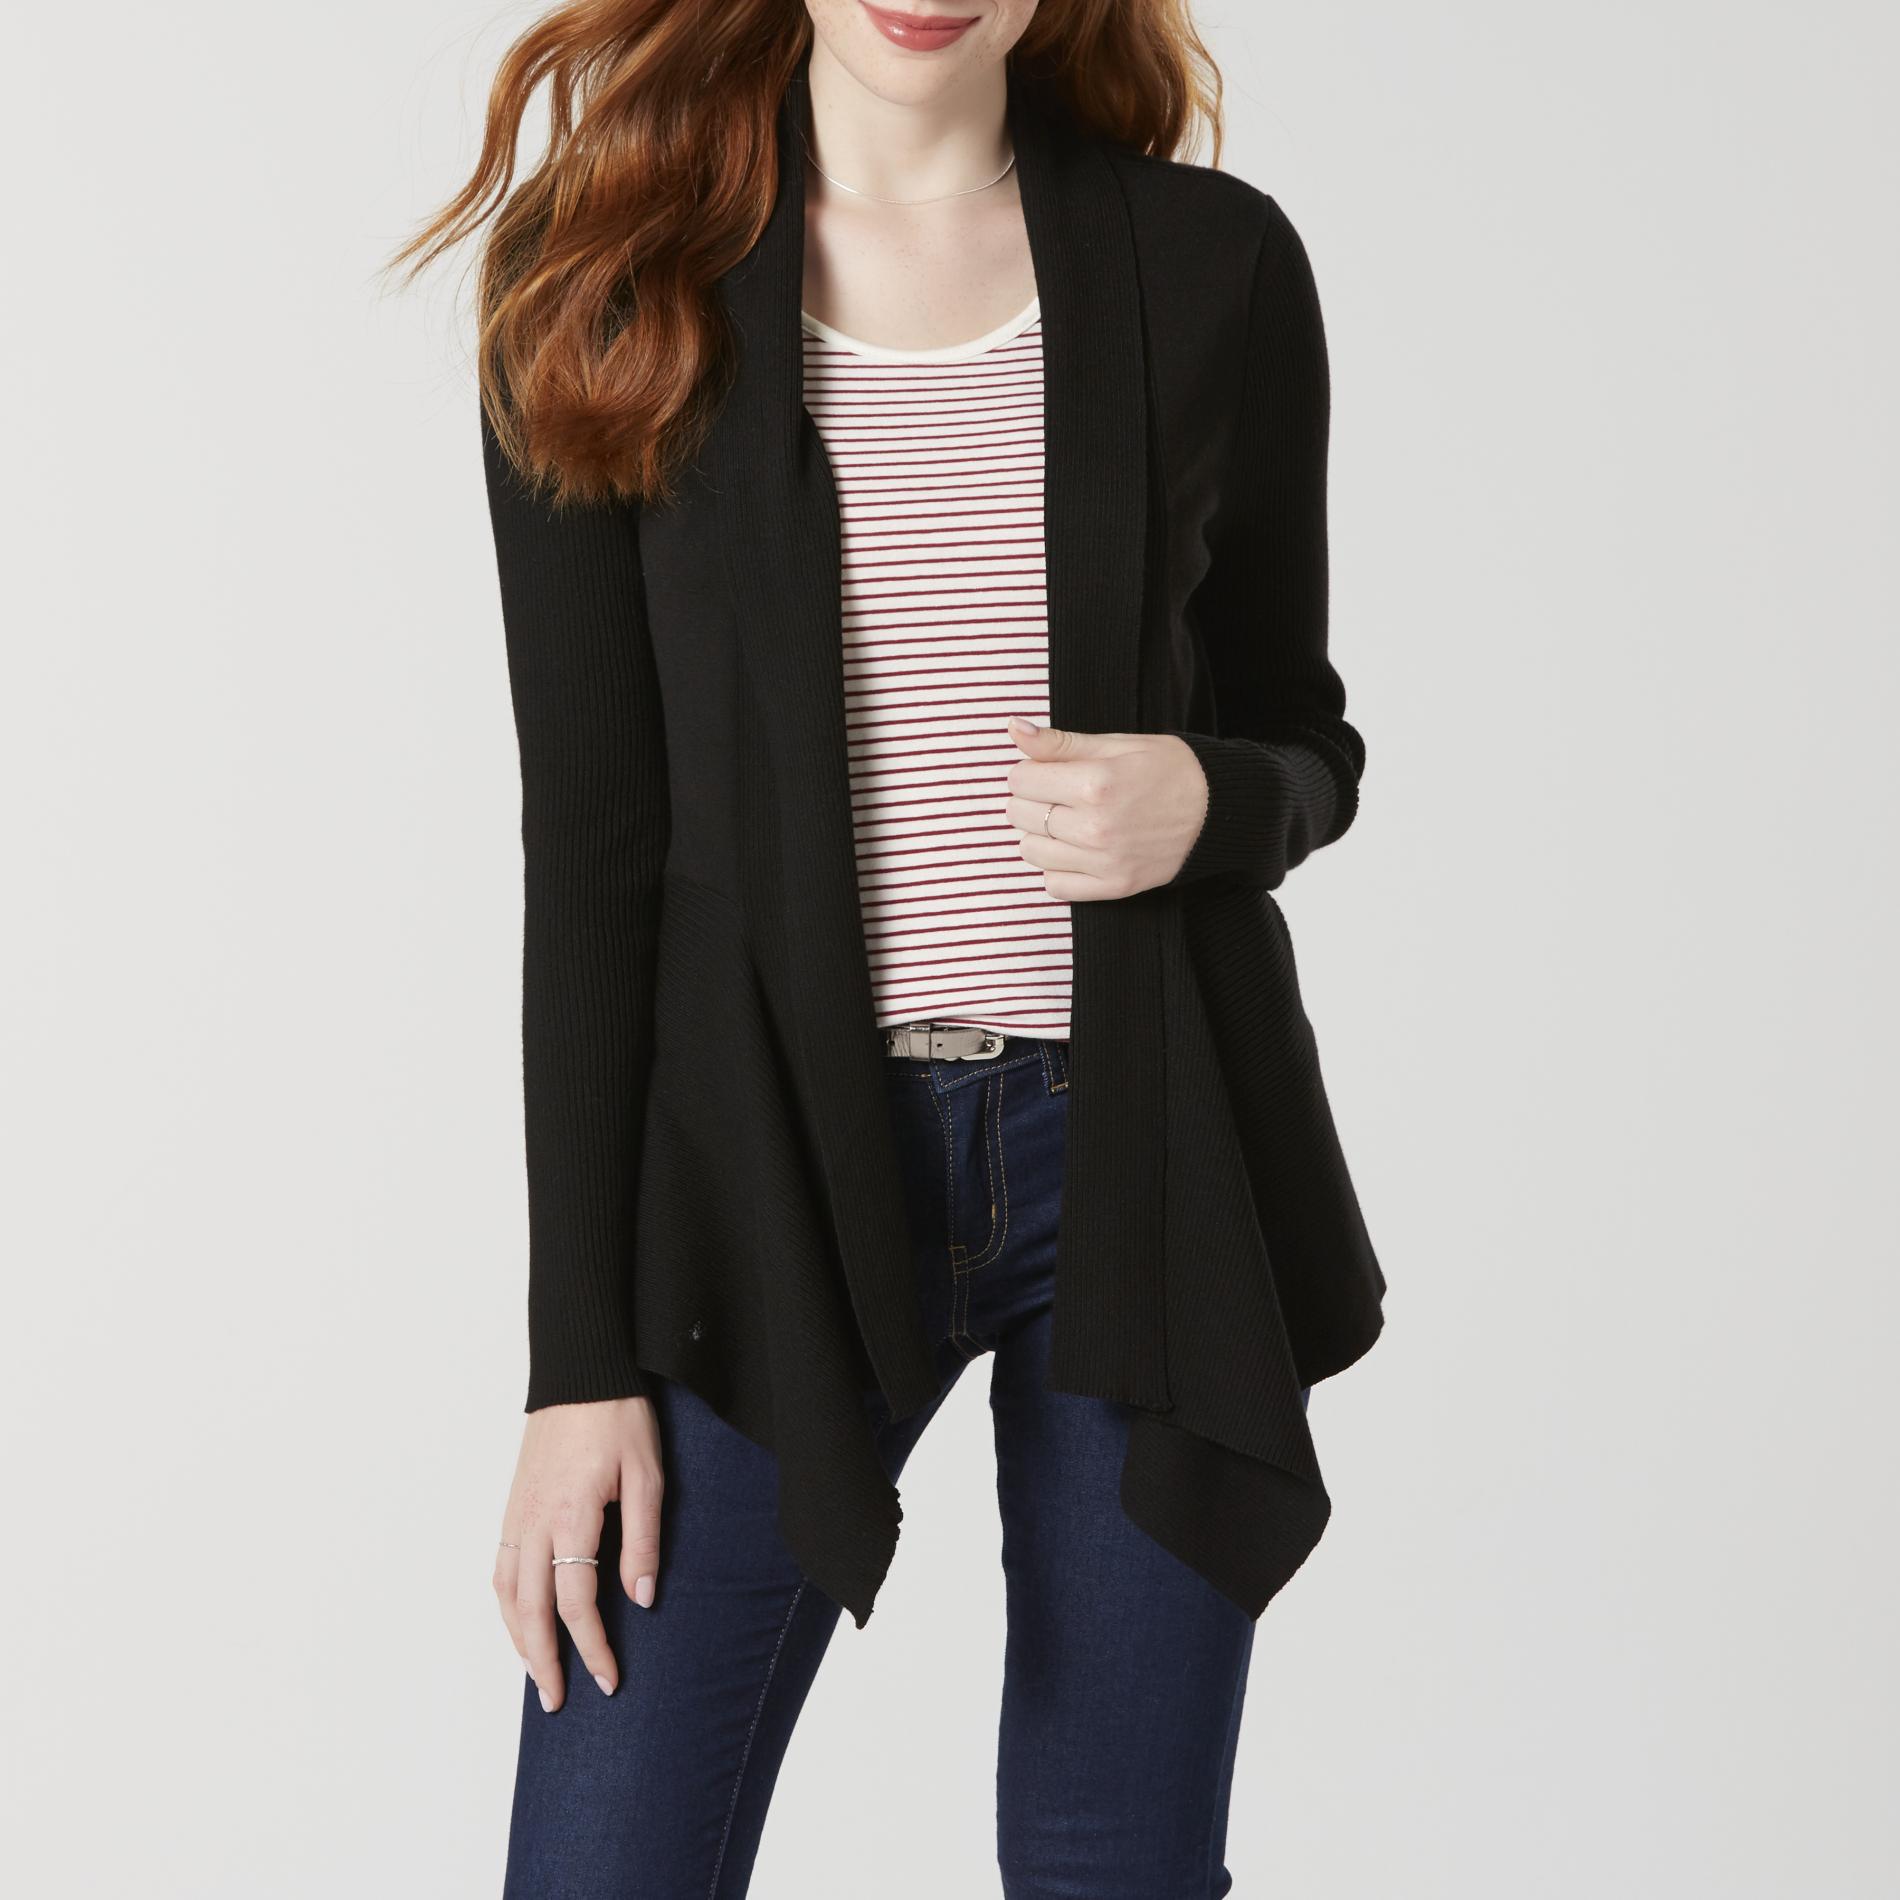 Simply Styled Petites' Open Front Cardigan